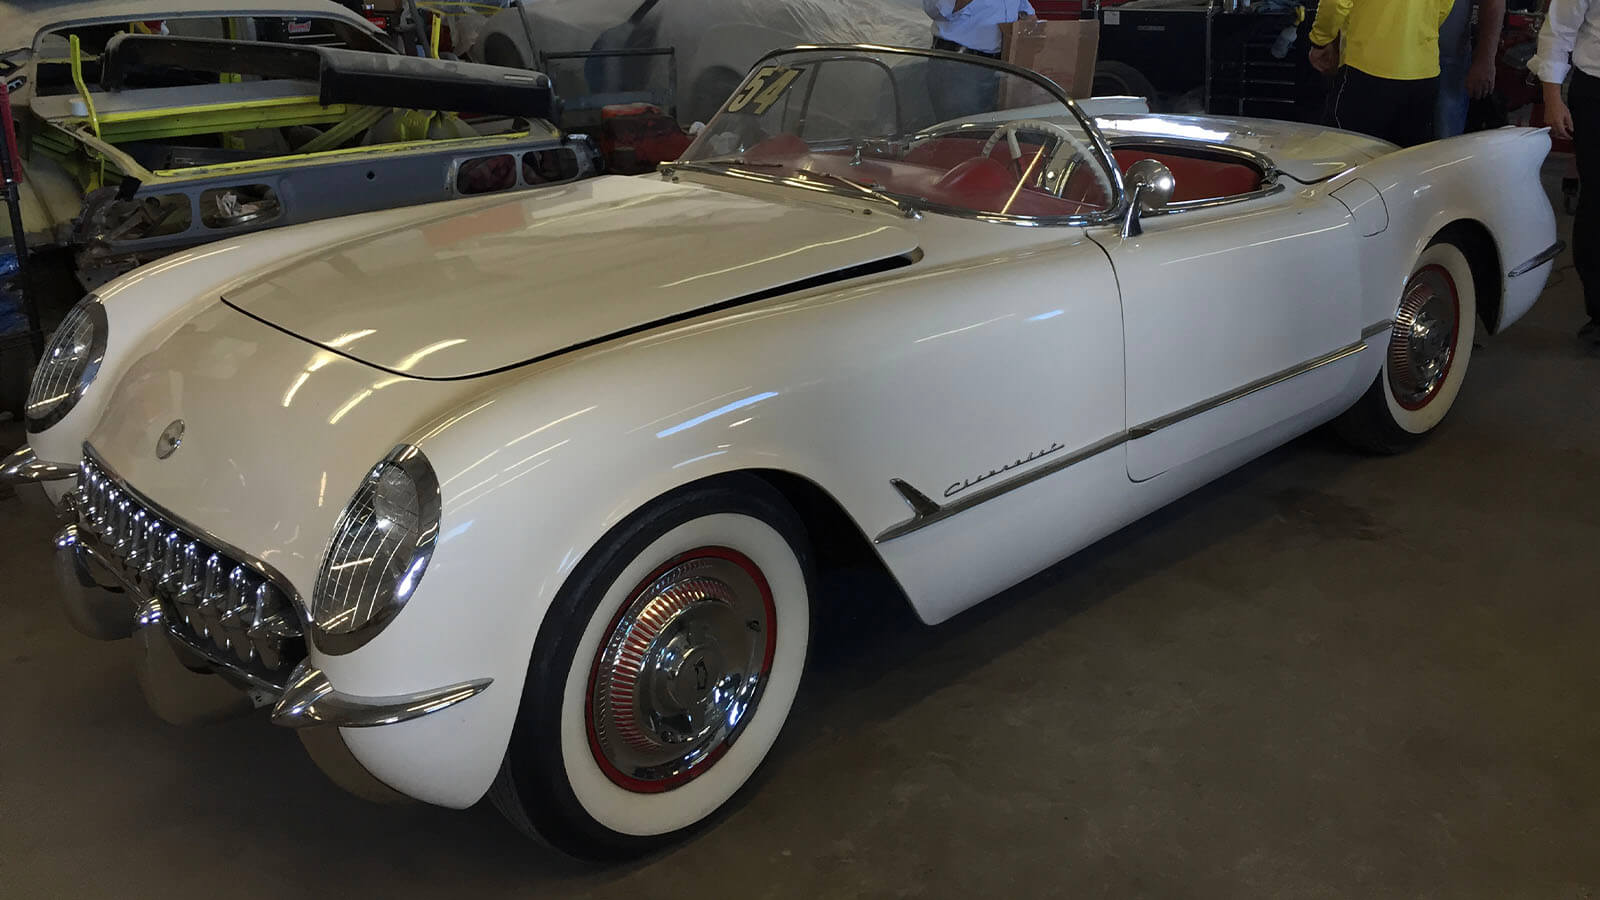 The 1954 Peter Max Corvette after full restoration.